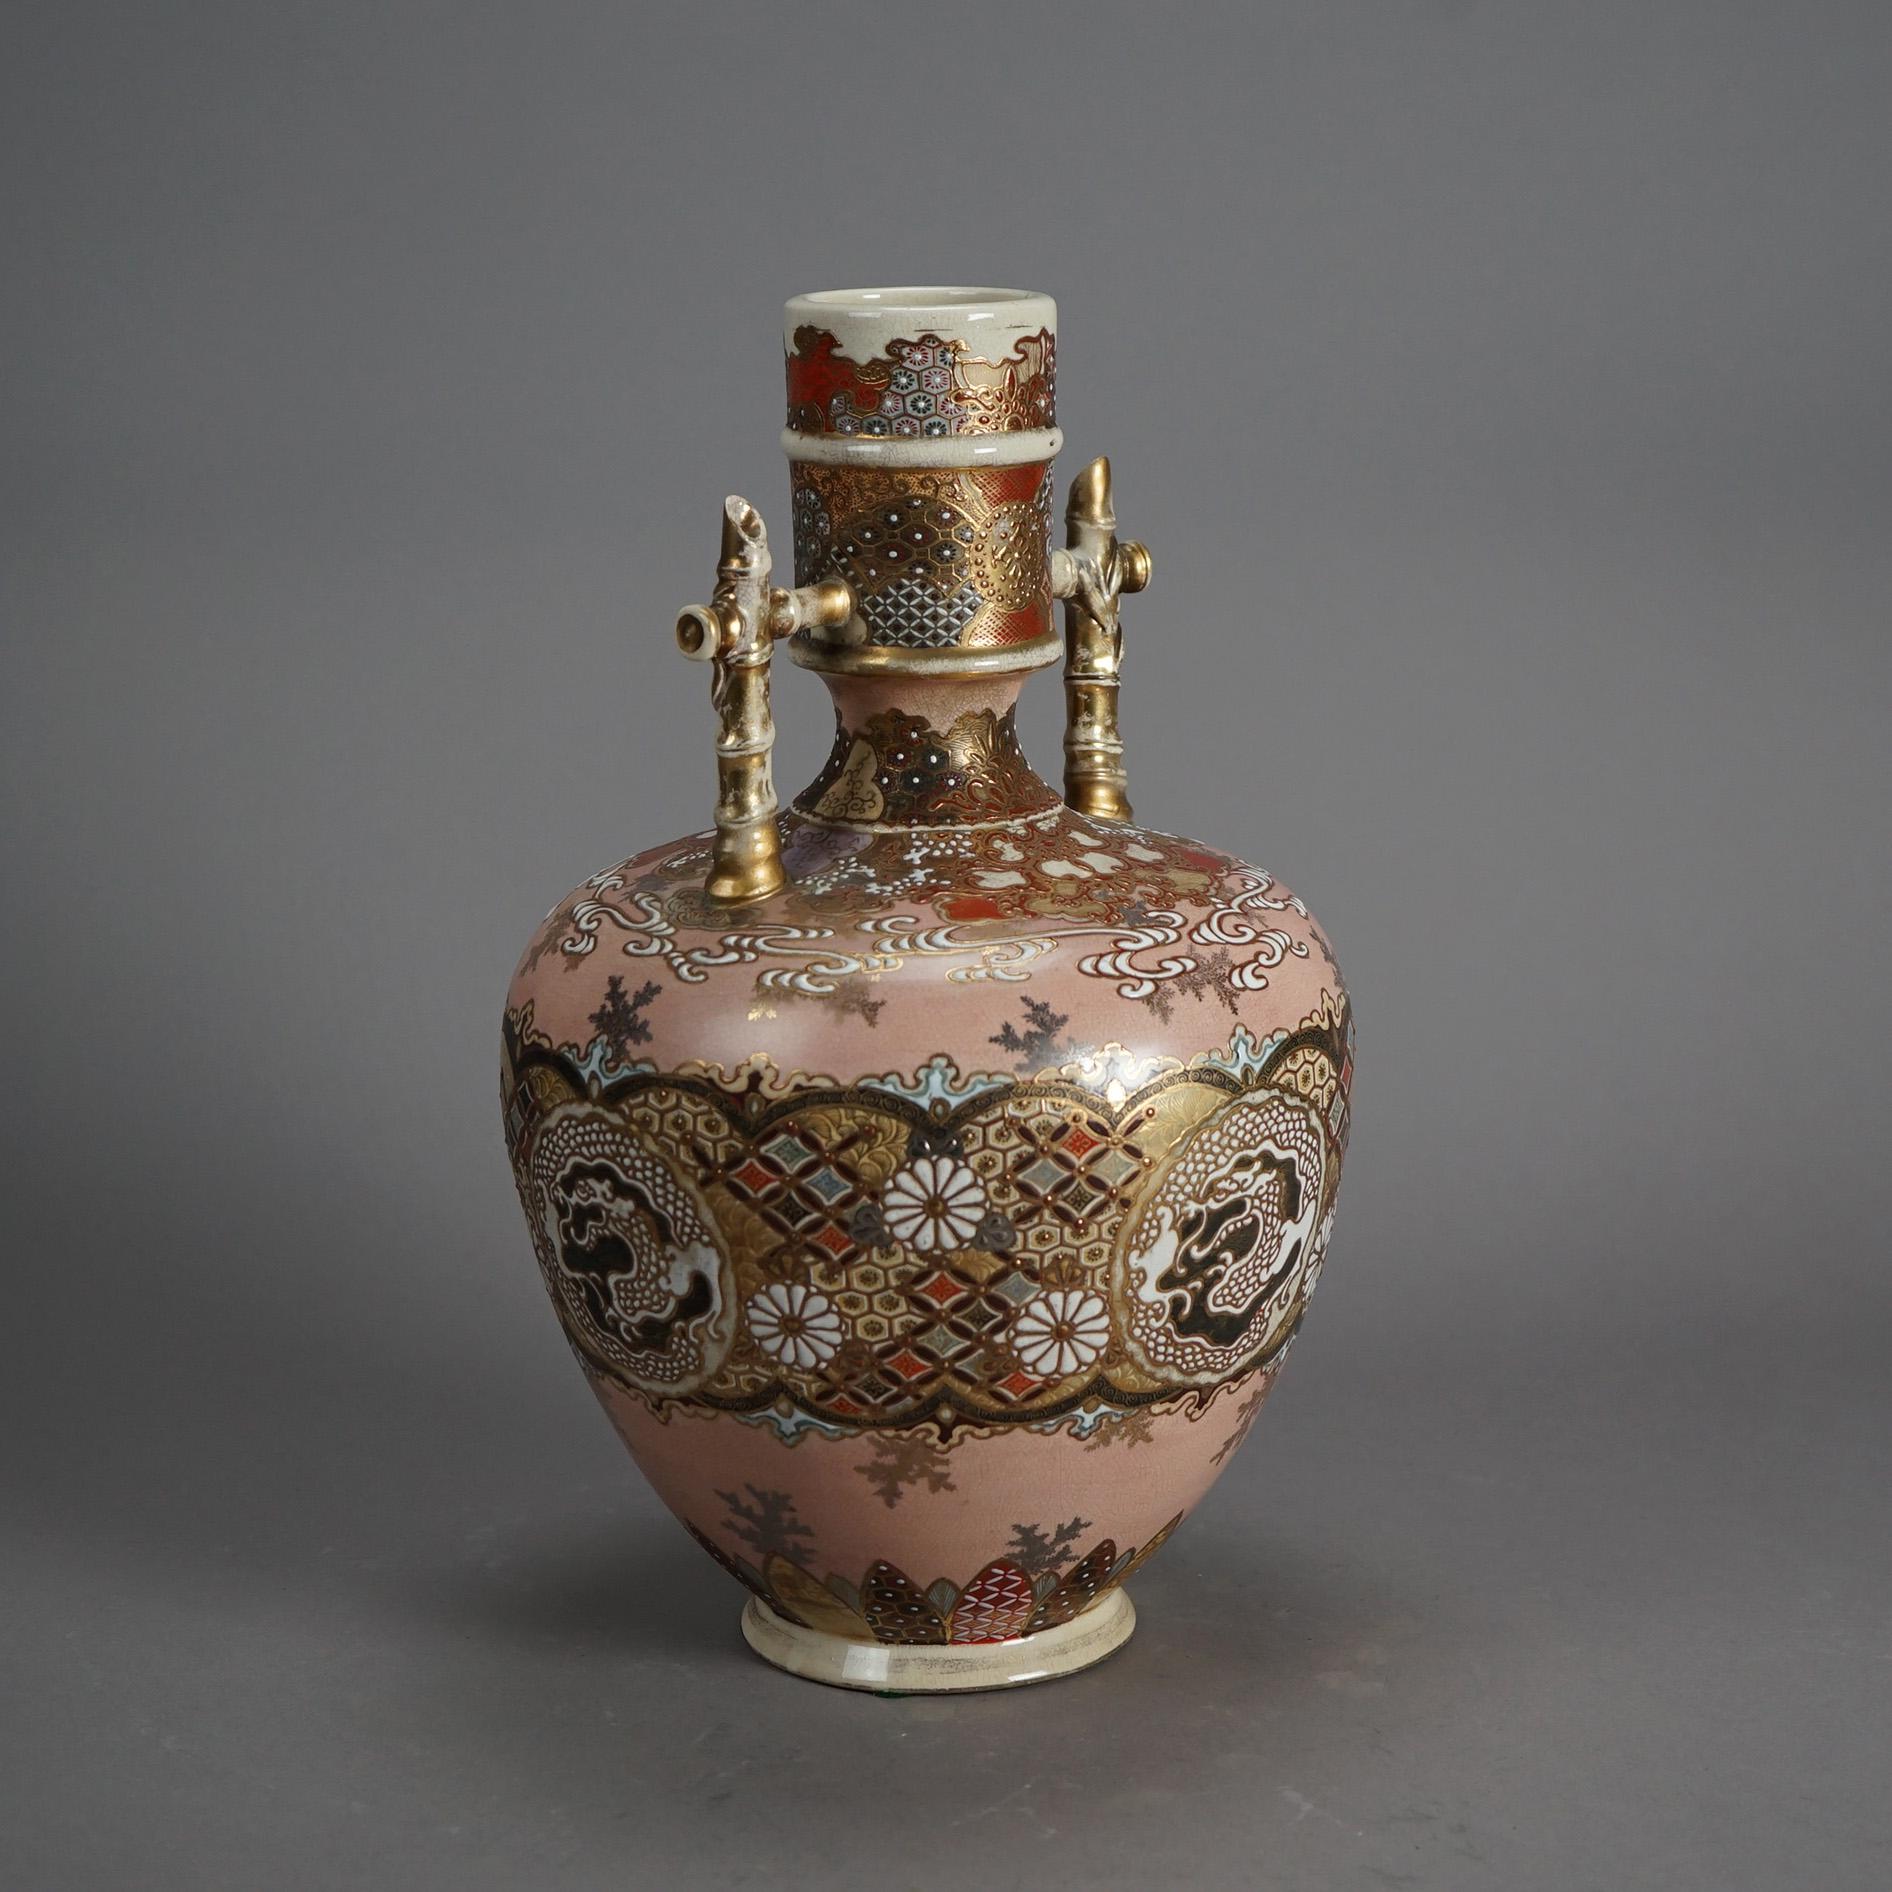 An antique Japanese Satsuma Meiji bottle vase offers porcelain construction with flanking bamboo form handles, hand gilt and painted floral, foliate and dragon design, signed as photographed, c1910

Measures- 15.5''H x 9.5''W x 9.5''D